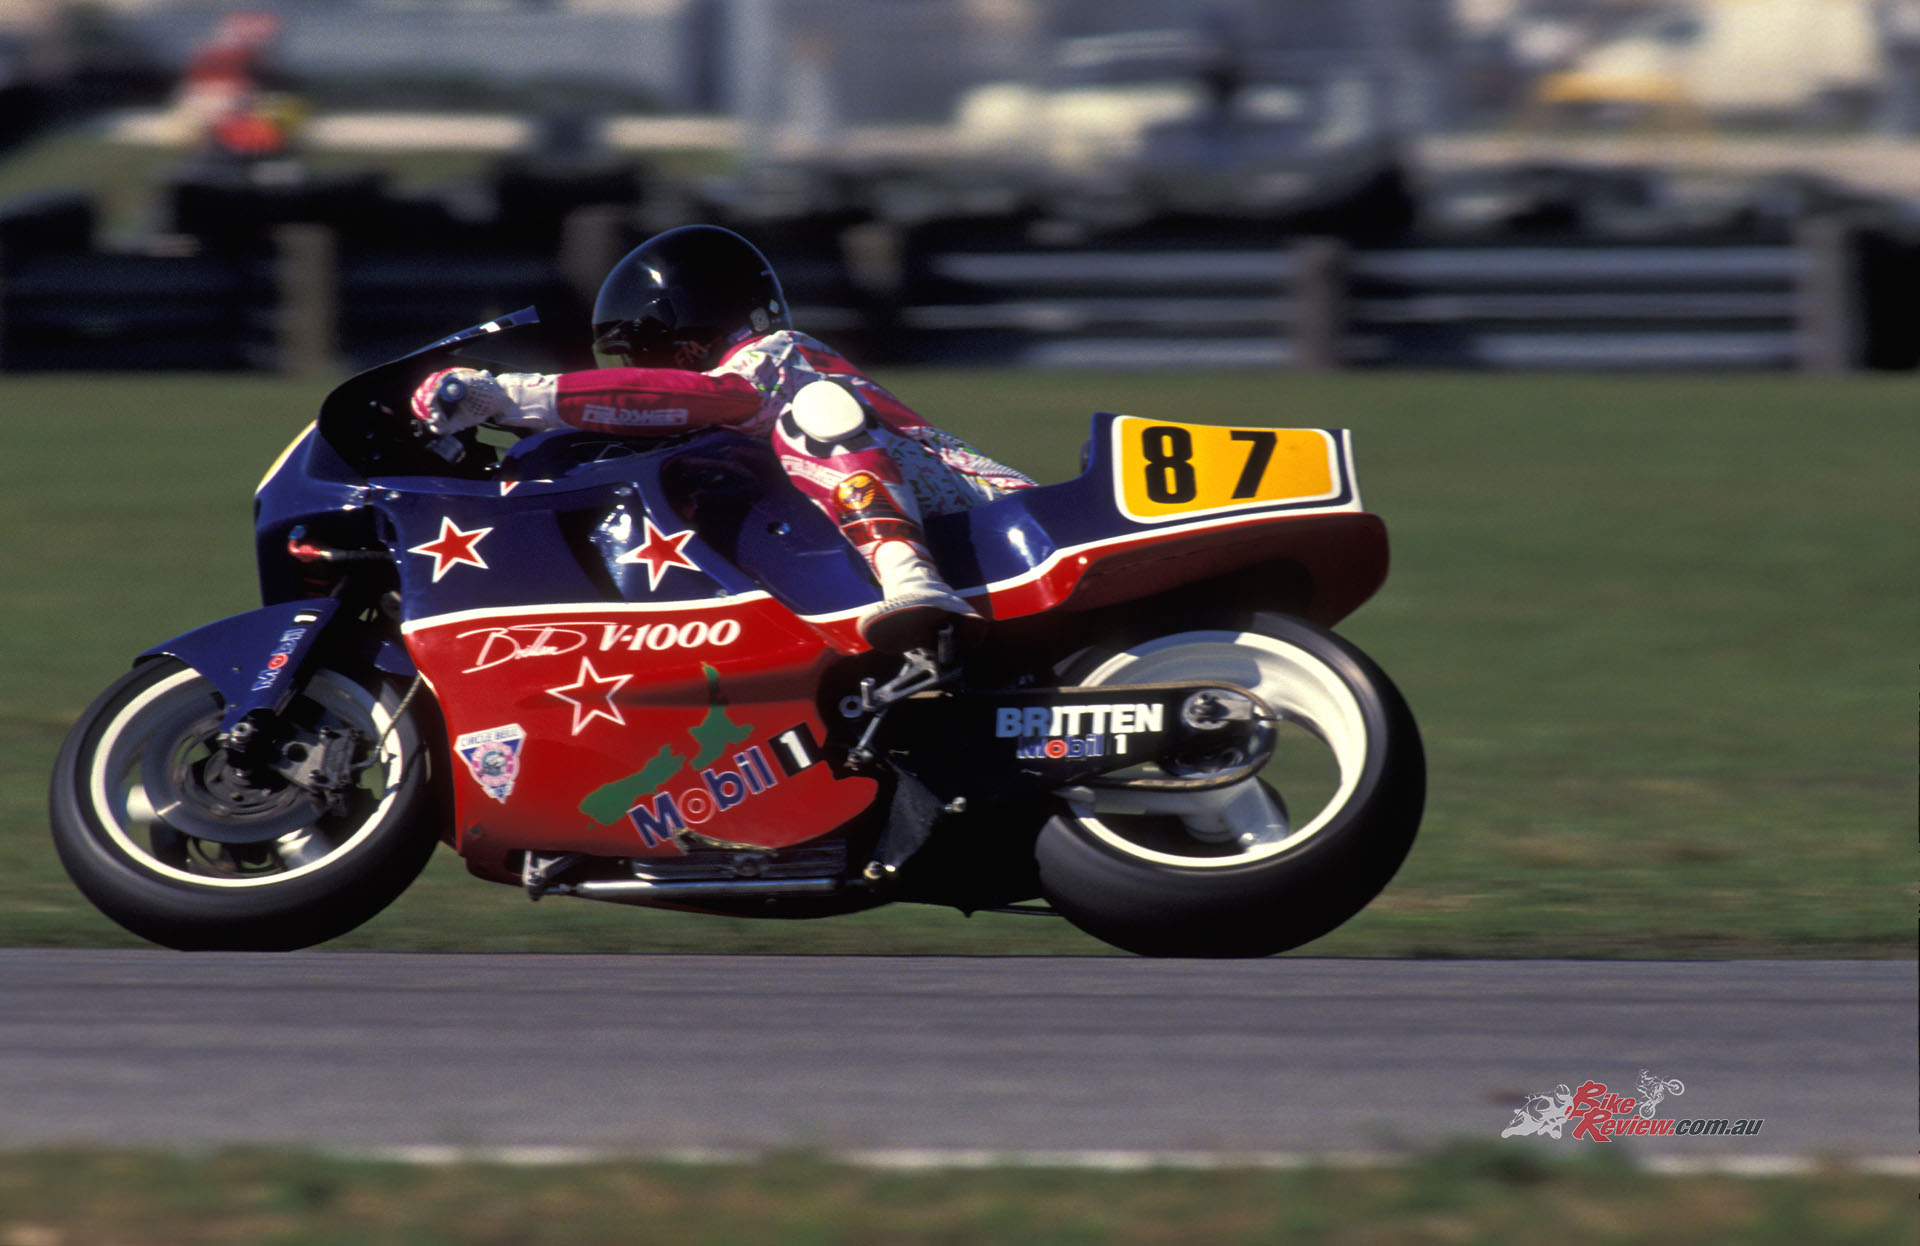 The V-1000 Britten came close to achieving John's ambition of defeating the Ducatis to win the Daytona BoTT/Battle of the Twins race, with Aussie Paul Lewis finishing second on his Britten to Doug Polen’s factory Ducati.